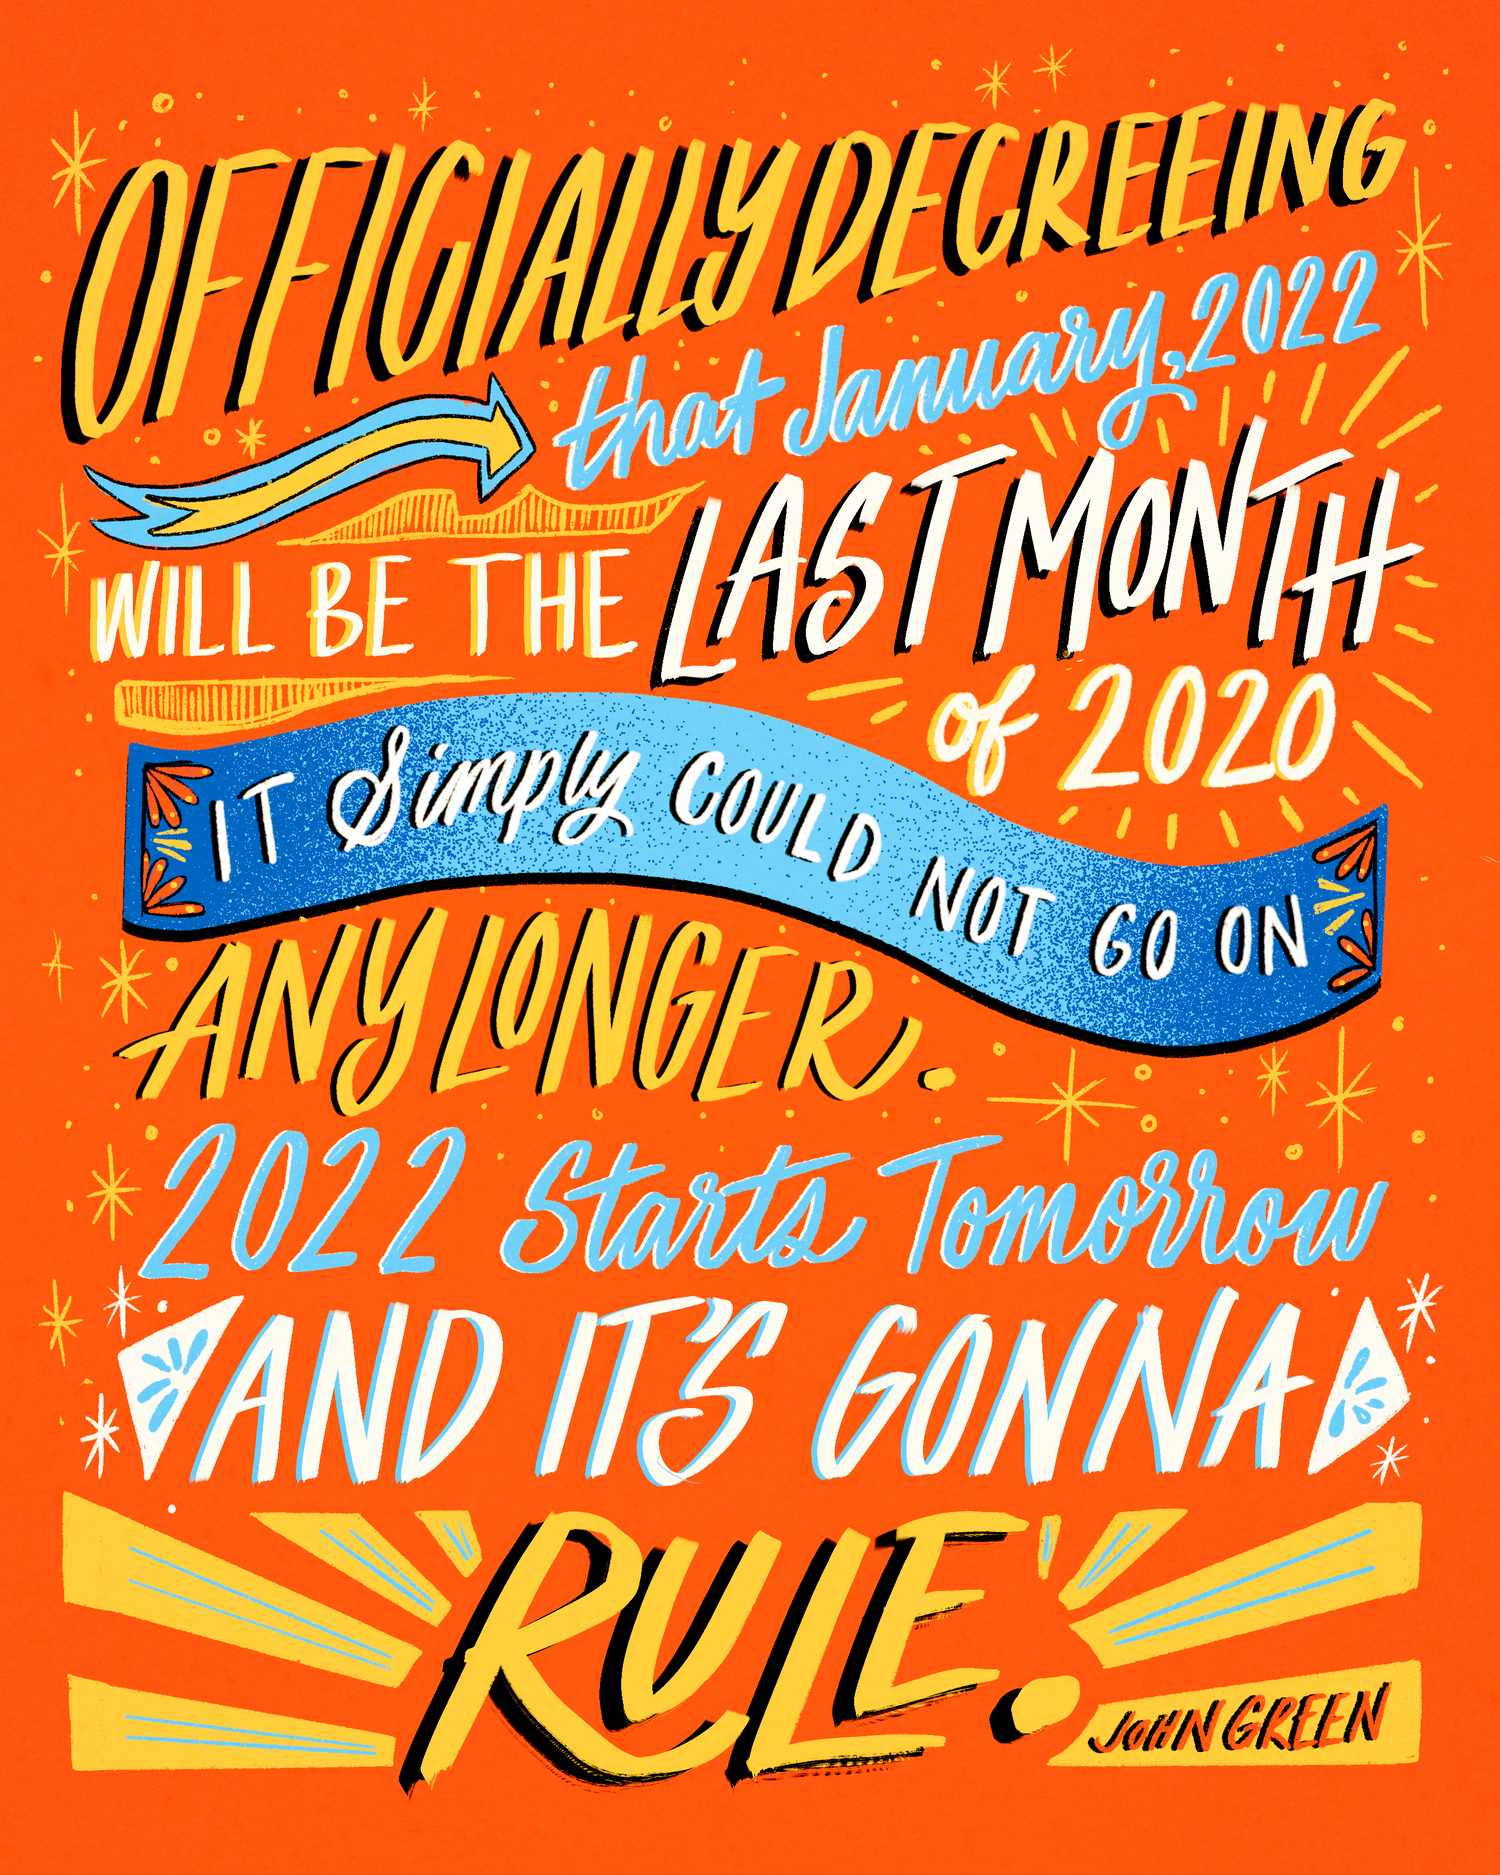 This year is gonna rule - John Green